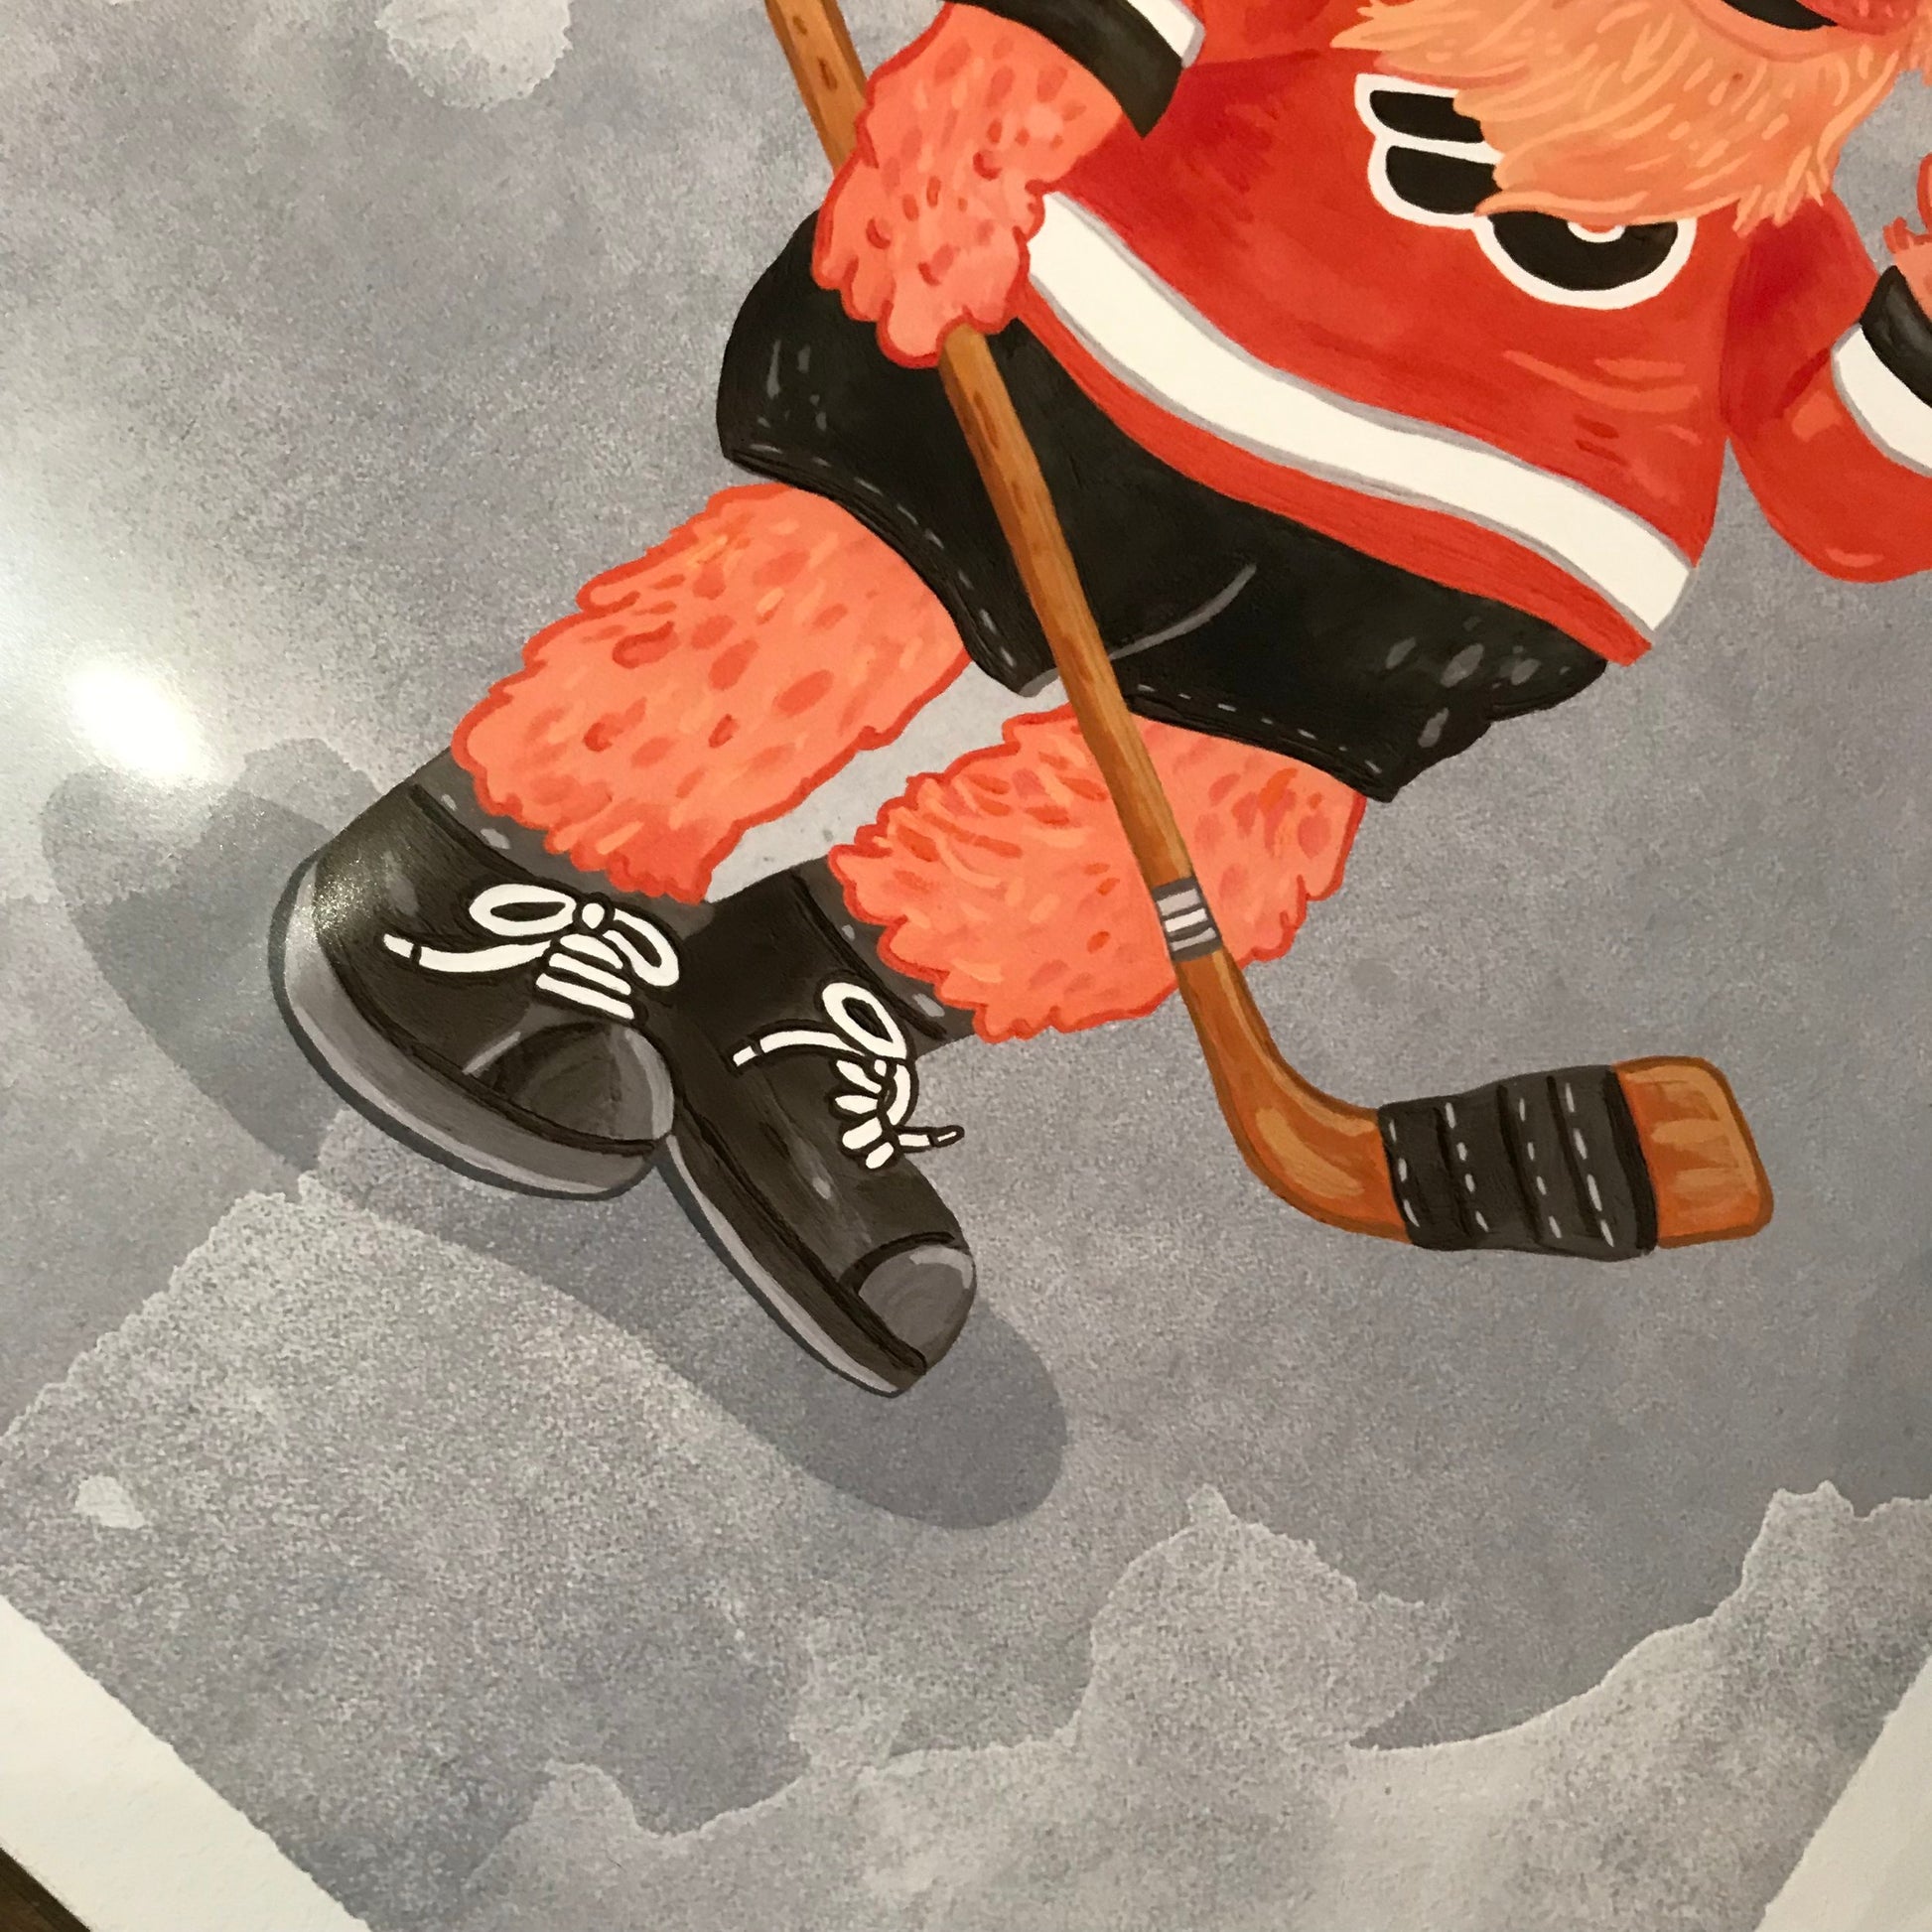 Illustration of a person's lower body wearing ice skates and a hockey uniform while holding a hockey stick, created by Jamie Bendas for Philly Mascot Prints.